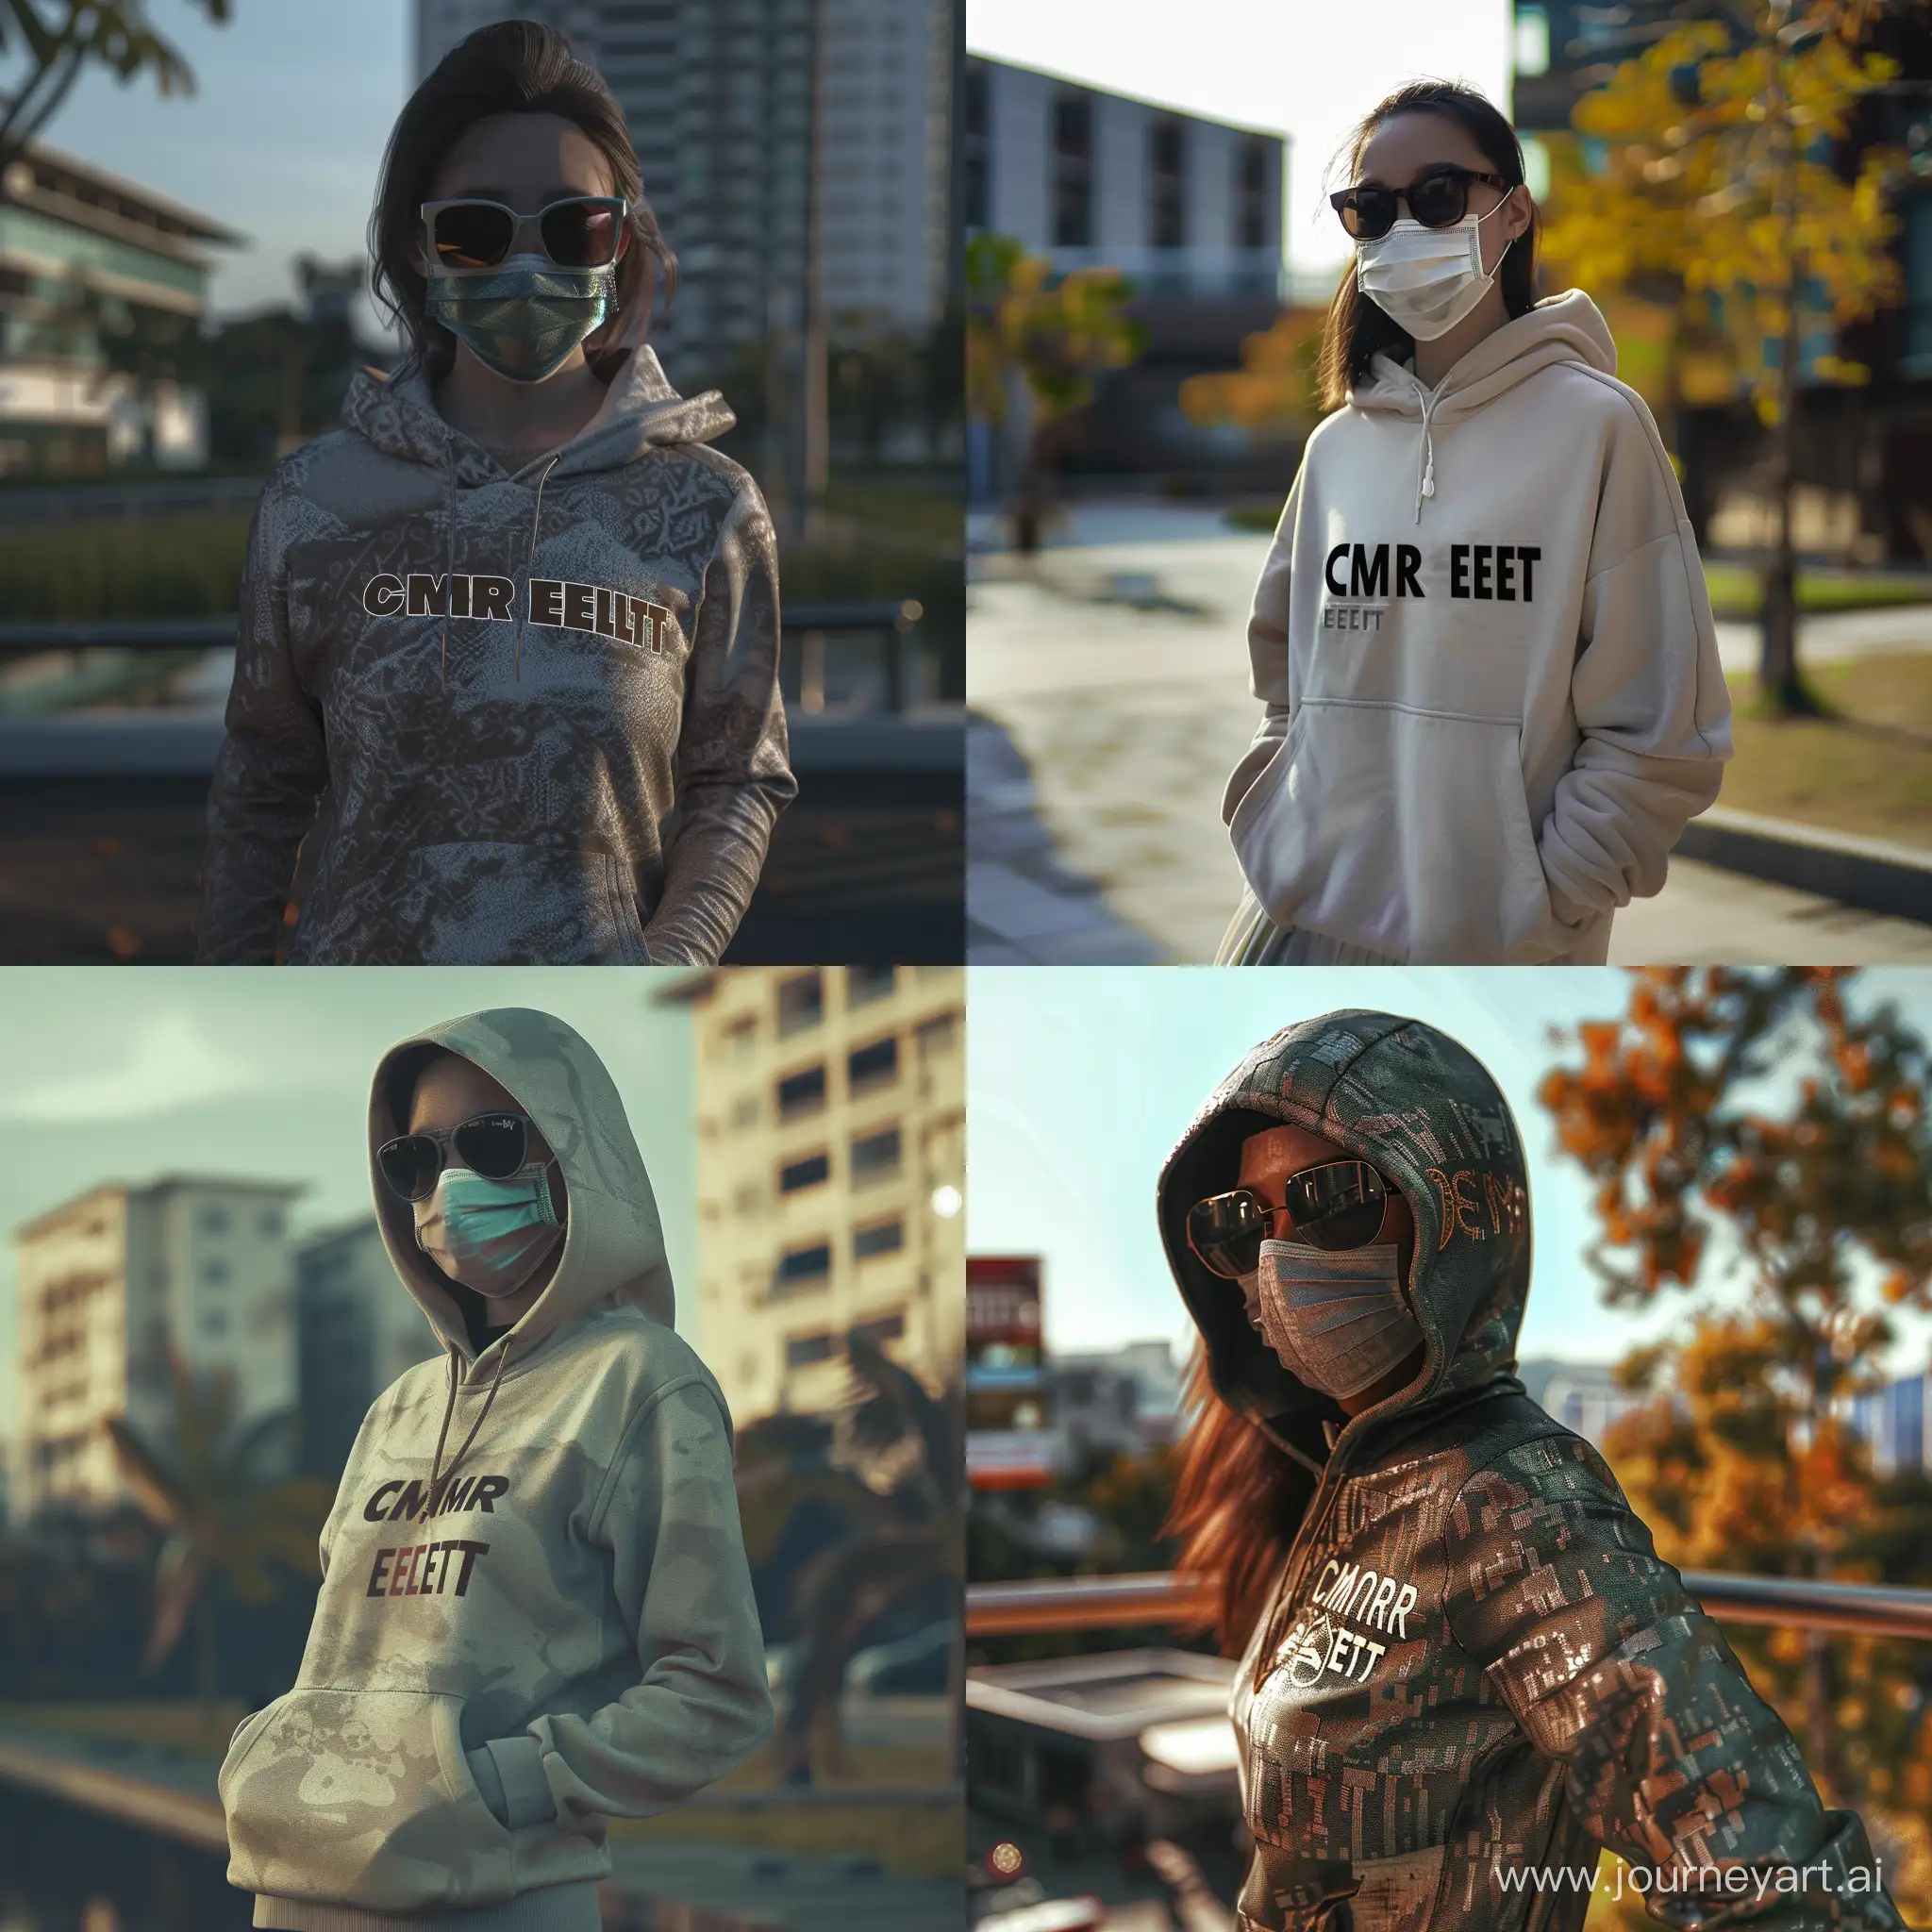 A 30-year-old woman from Indonesia wearing sunglasses, a mask, and a hoodie with the inscription 'CMR elite' is clearly seen standing on a campus, with the surroundings of the campus, realistic HD lighting, and sharp colors.